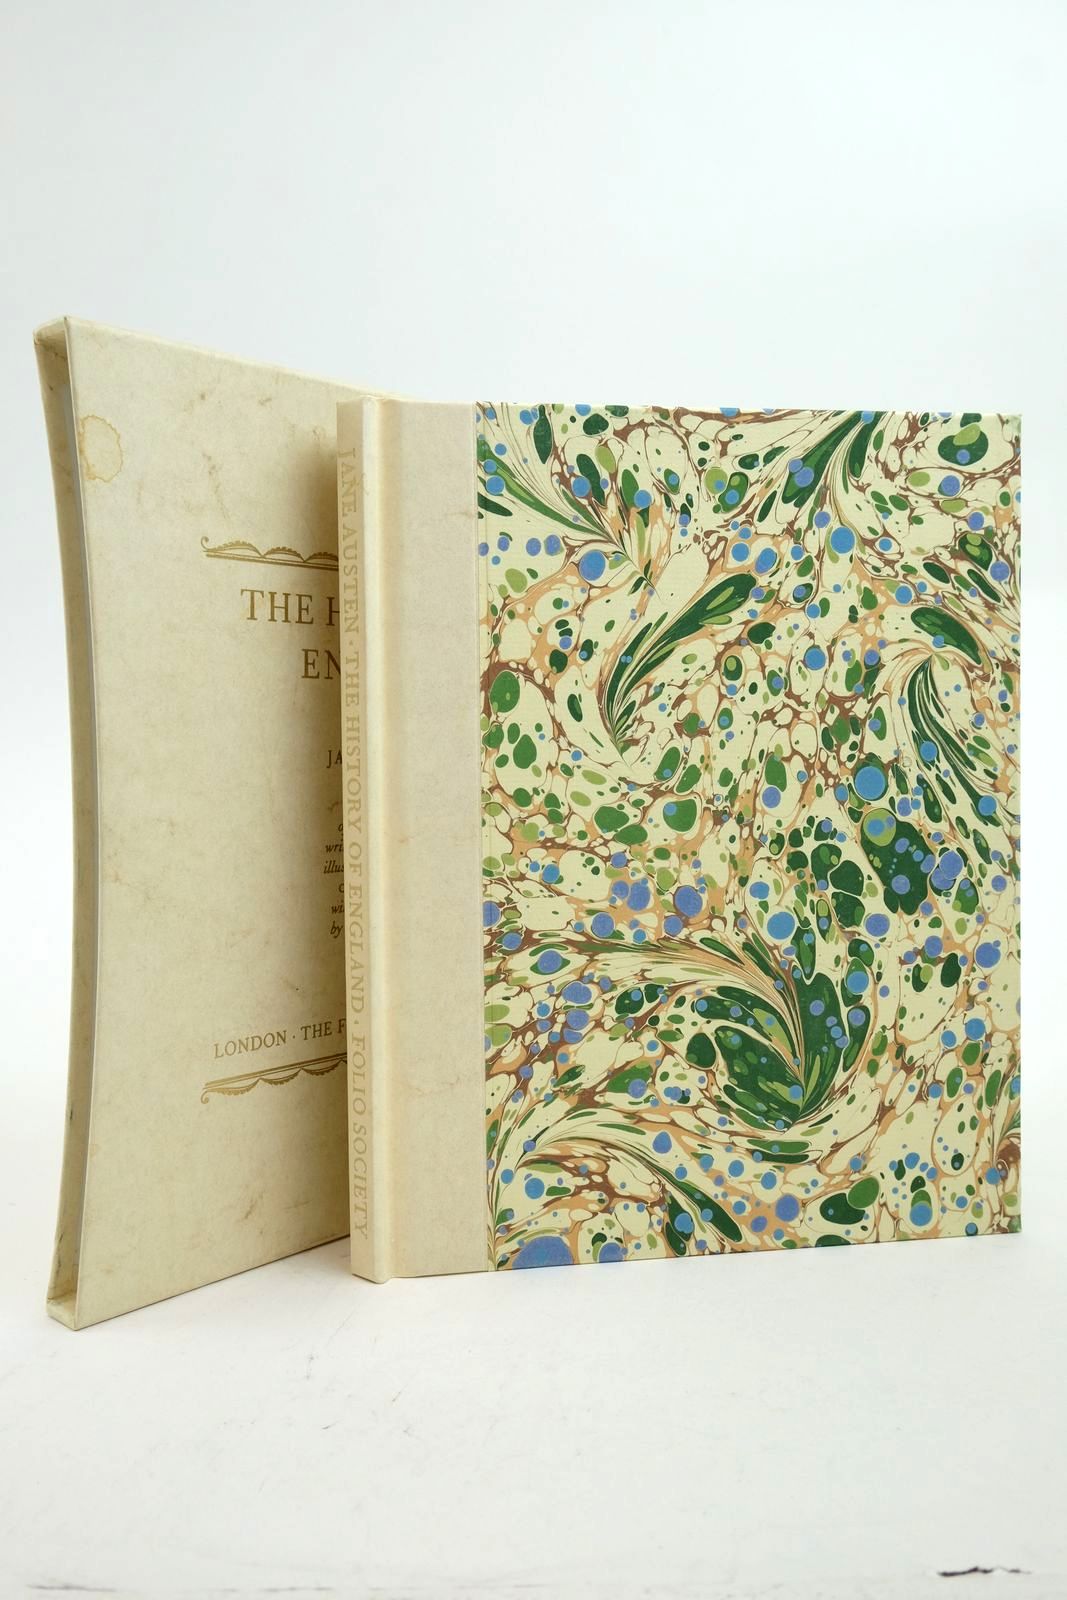 Photo of THE HISTORY OF ENGLAND written by Austen, Jane illustrated by Austen, Cassandra published by Folio Society (STOCK CODE: 2139225)  for sale by Stella & Rose's Books